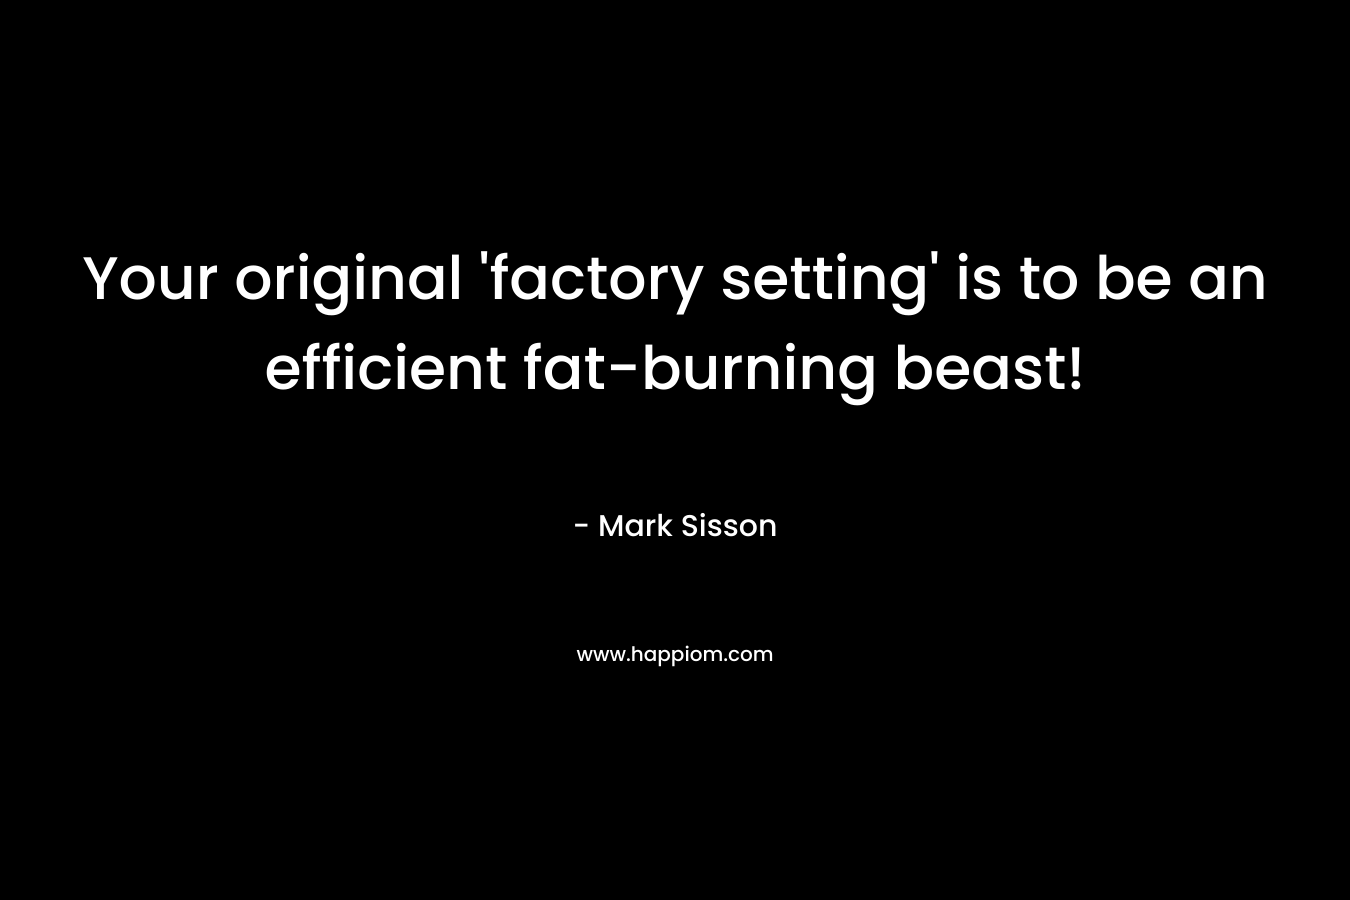 Your original ‘factory setting’ is to be an efficient fat-burning beast! – Mark Sisson